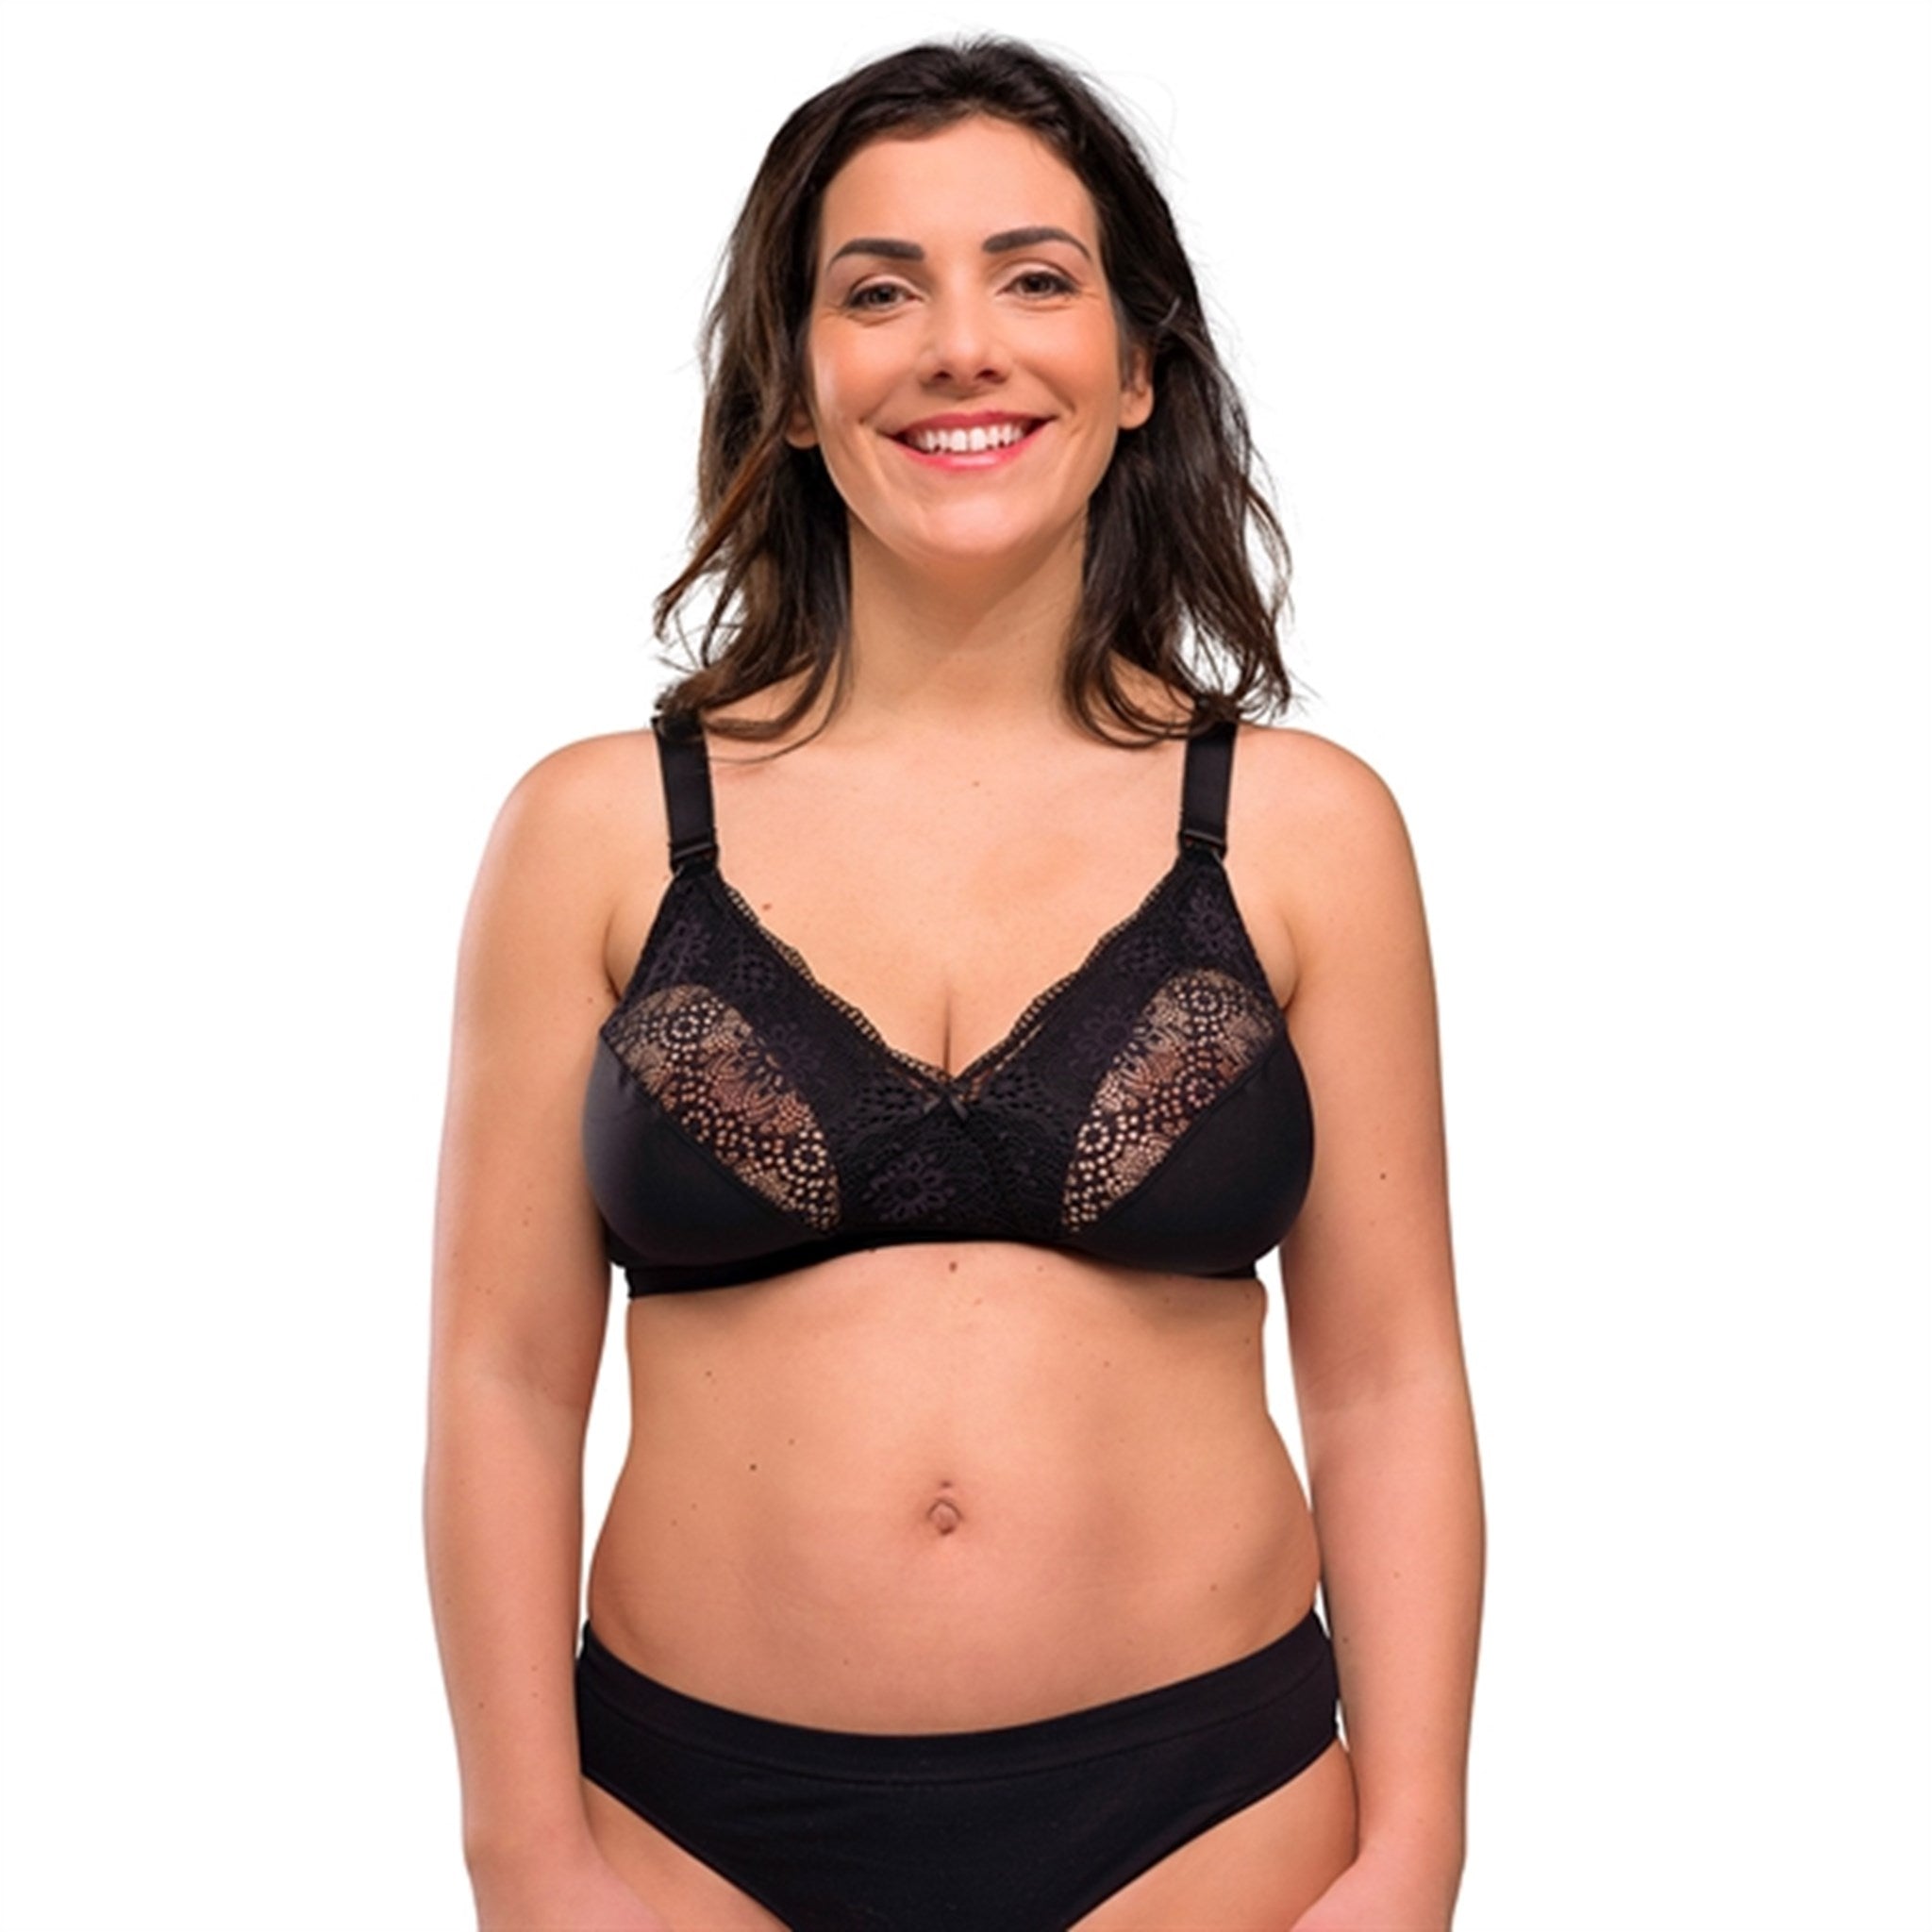 Maternity Lace Nursing Bra by Carriwell White or Black